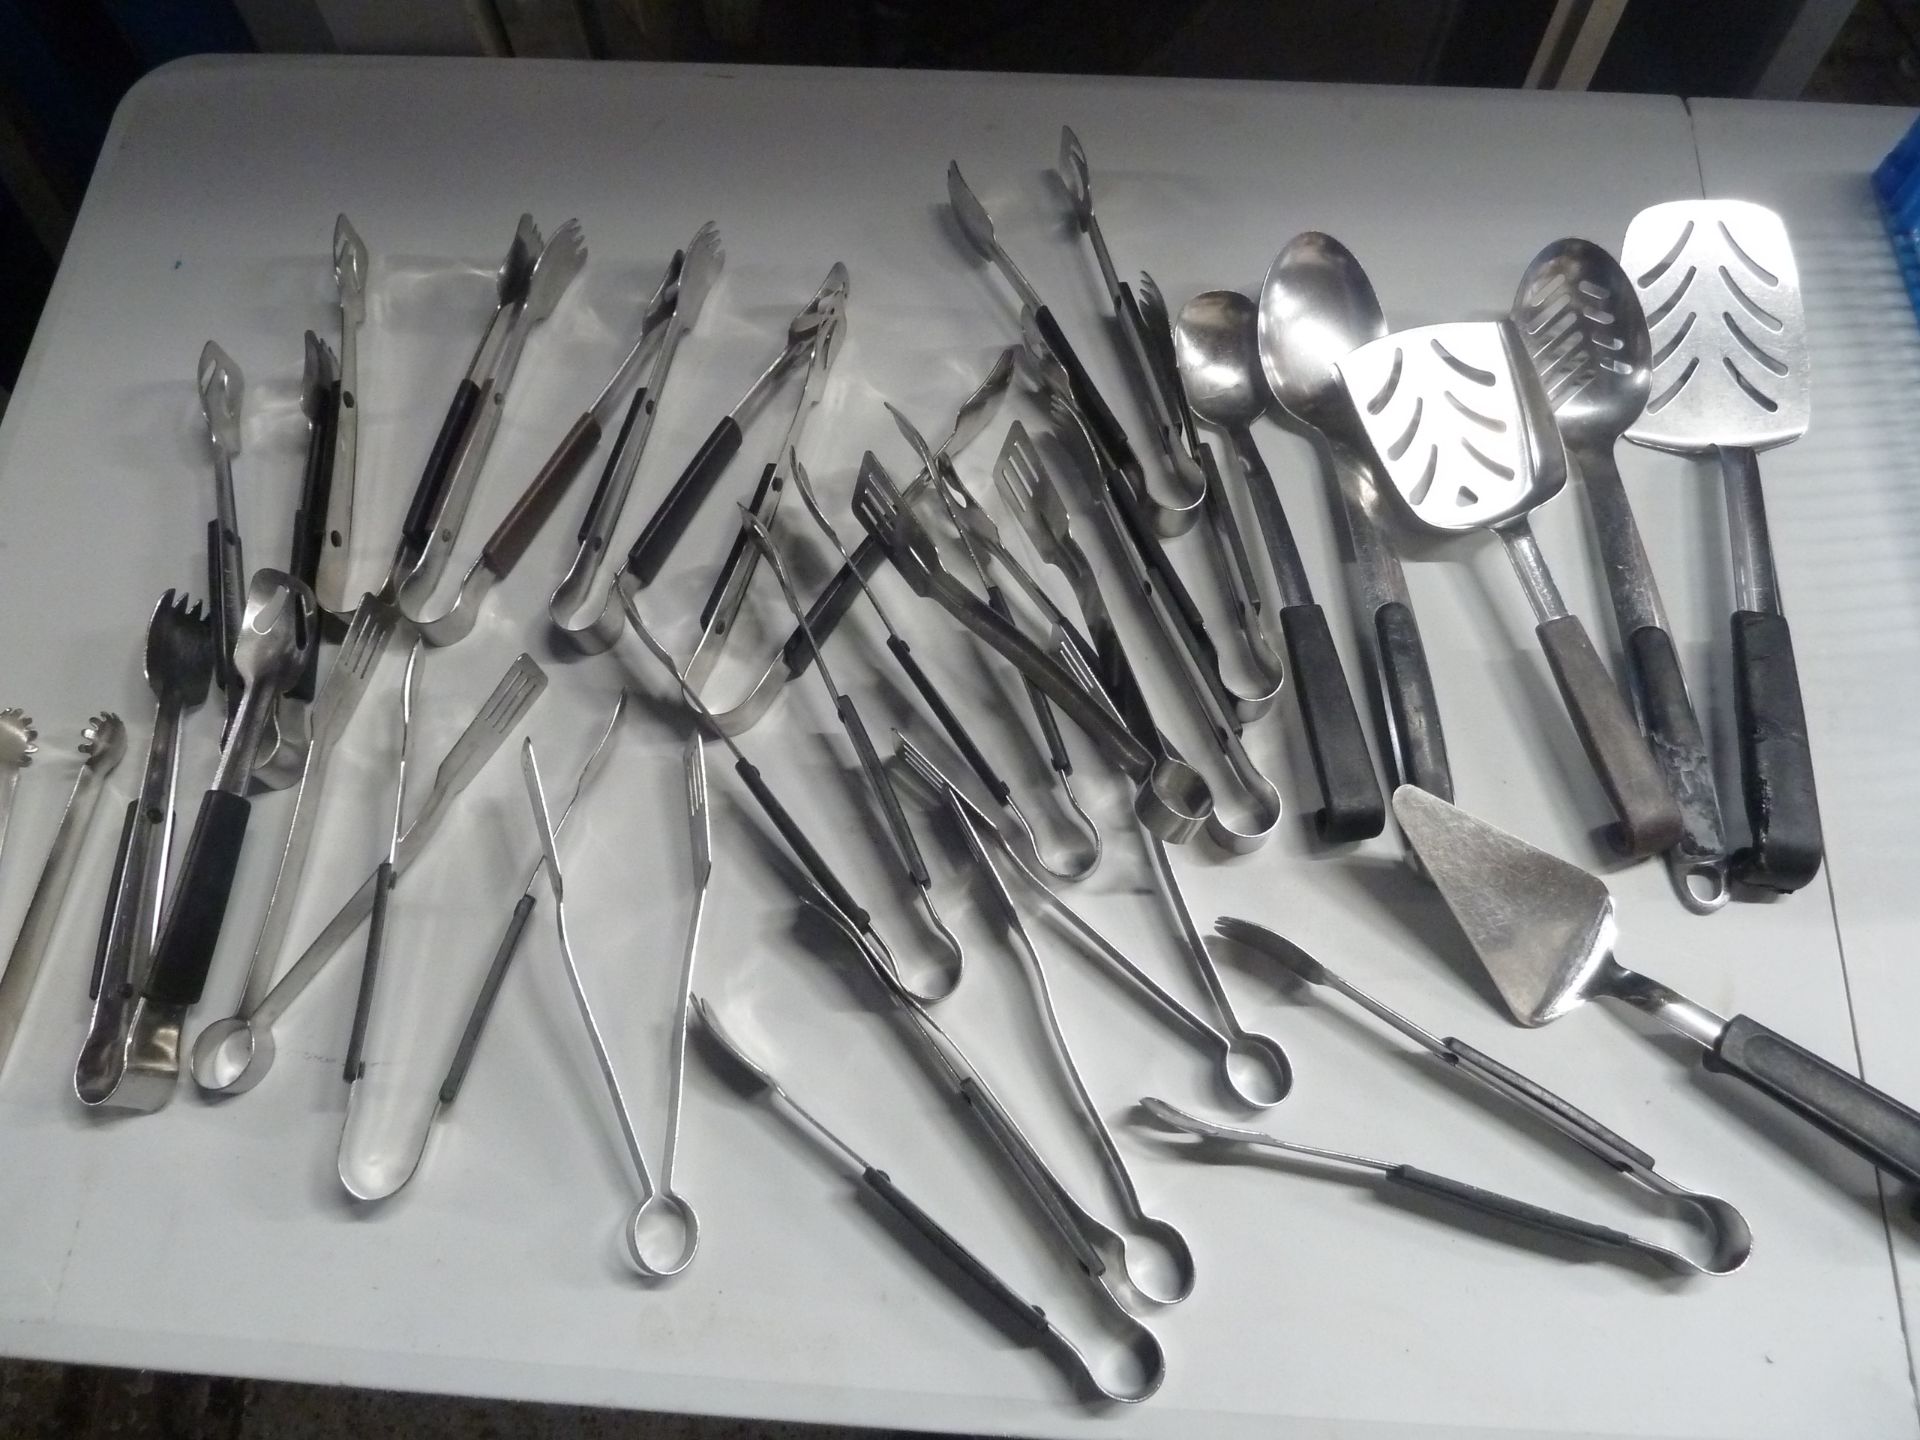 * selection of utensils - tongs, fish slices, spoons, scoops x approx. 25